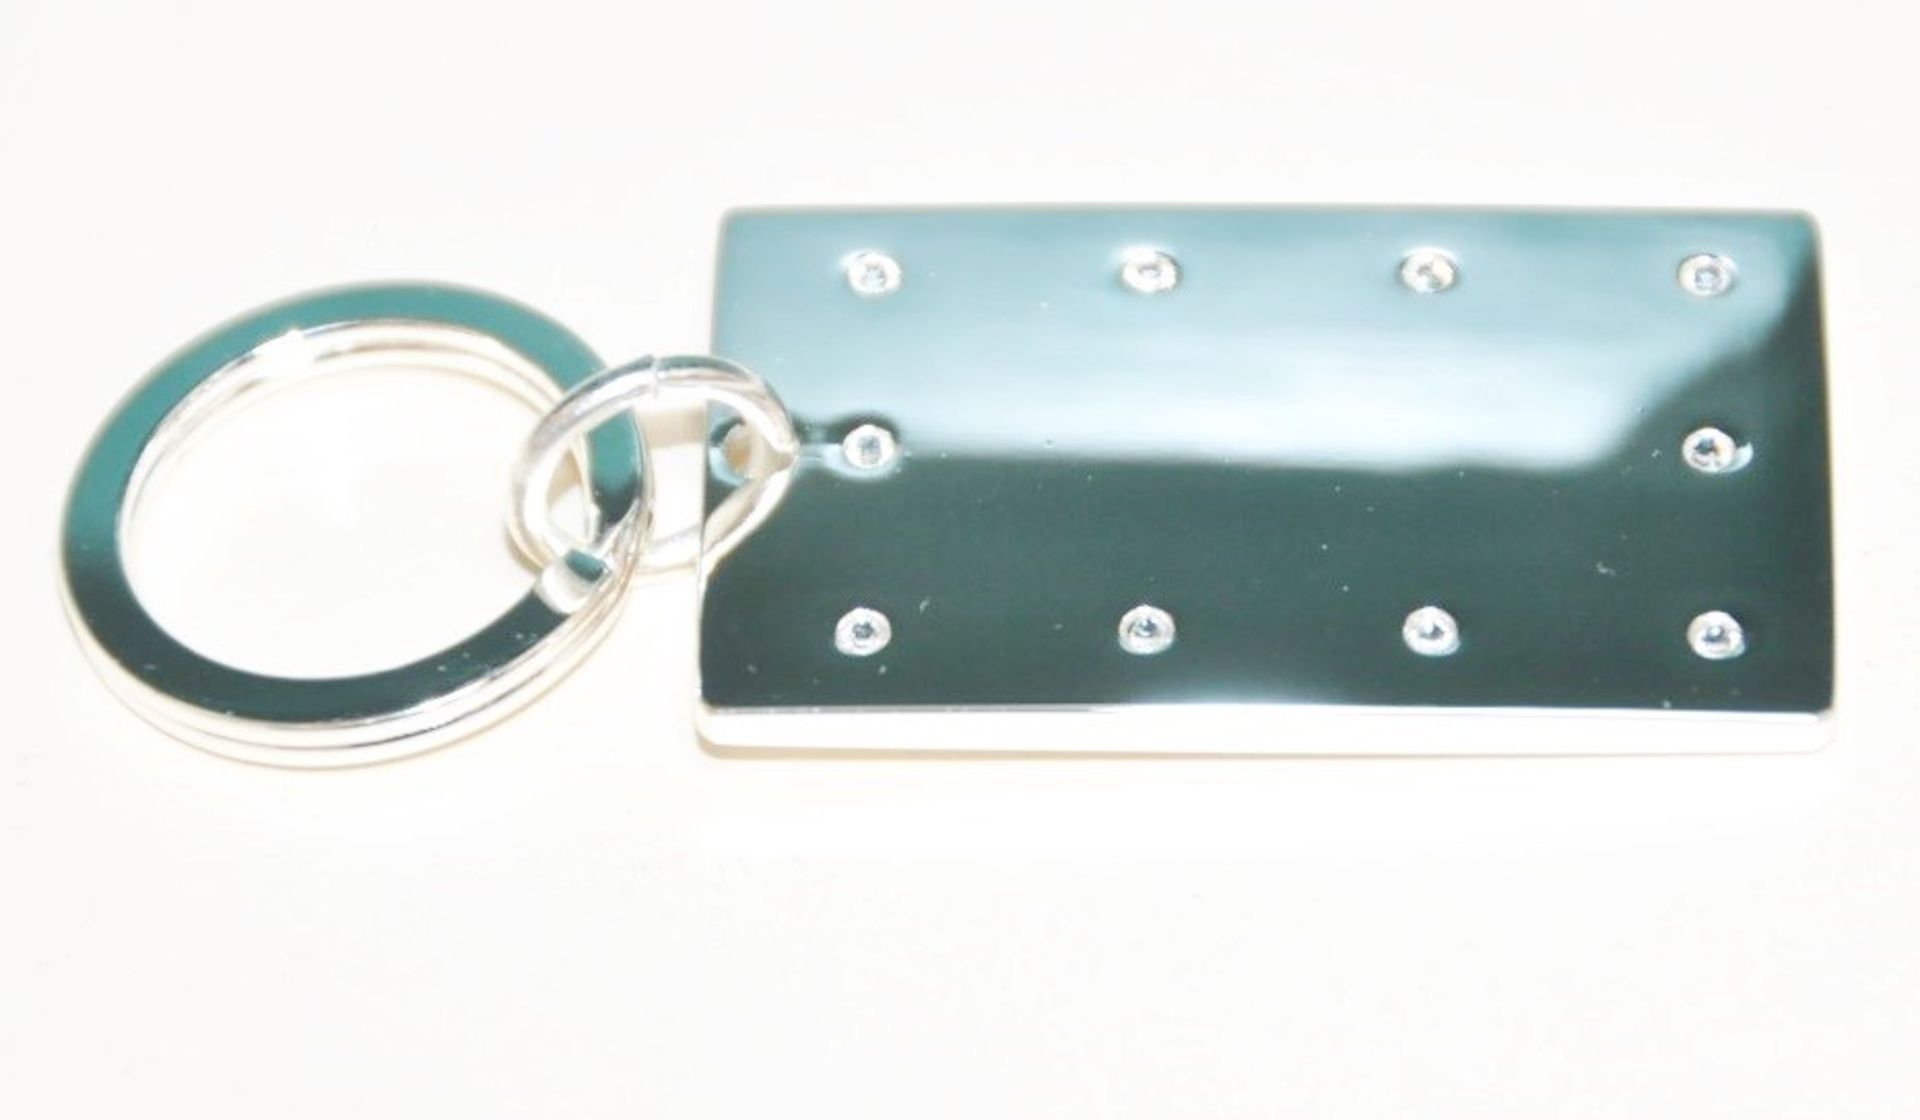 50 x Silver Plated Rectangular Key Rings By ICE London - MADE WITH "SWAROVSKI¨ ELEMENTS - Luxury - Image 6 of 6